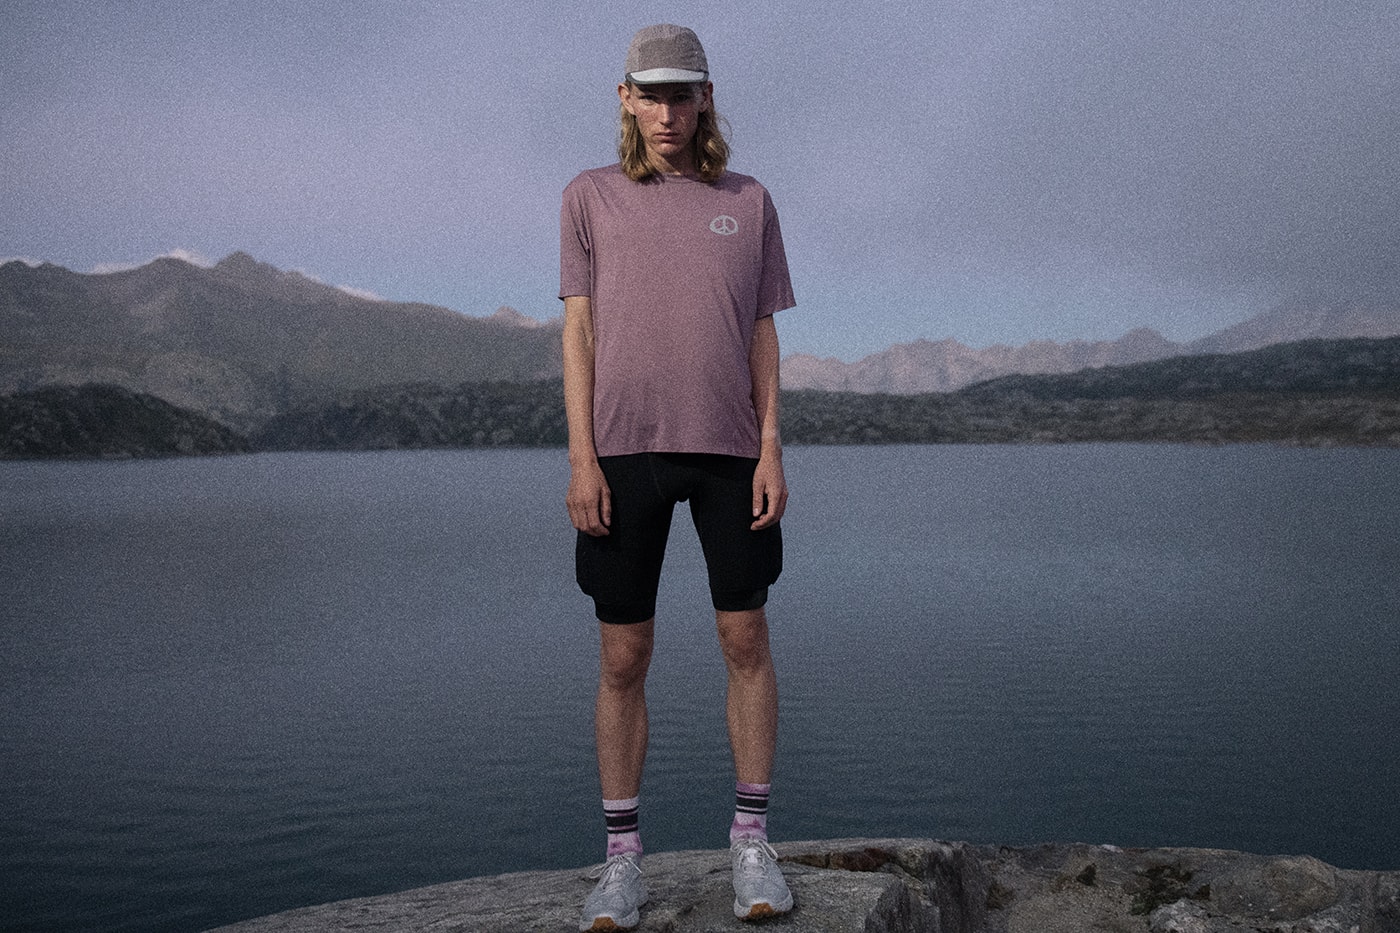 Satisfy's "Trailism" Drop Caters to a Runners Individual Style